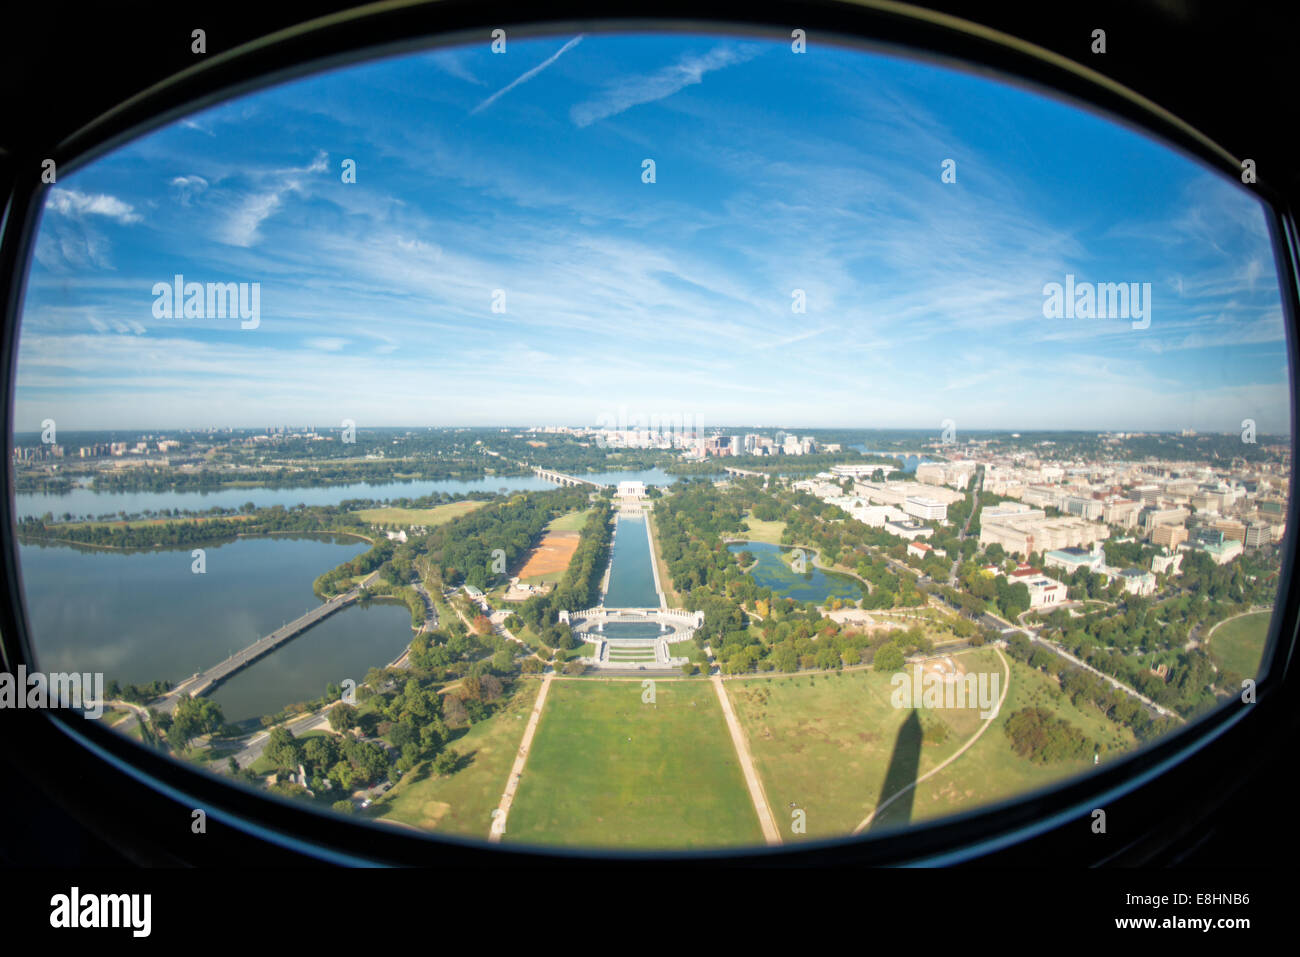 WASHINGTON DC, USA - The view from one of the windows at the top of the Washington Monument, looking out over the Reflecting Pool and the Lincoln Memorial towards Arlington Memorial Bridge and Arlington, VA. The Washington Monument stands at over 555 feet (169 metres) at the center of the National Mall in Washington DC. It was completed in 1884 and underwent extensive renovations in 2012-13 after an earthquake damaged some of the structure. Stock Photo